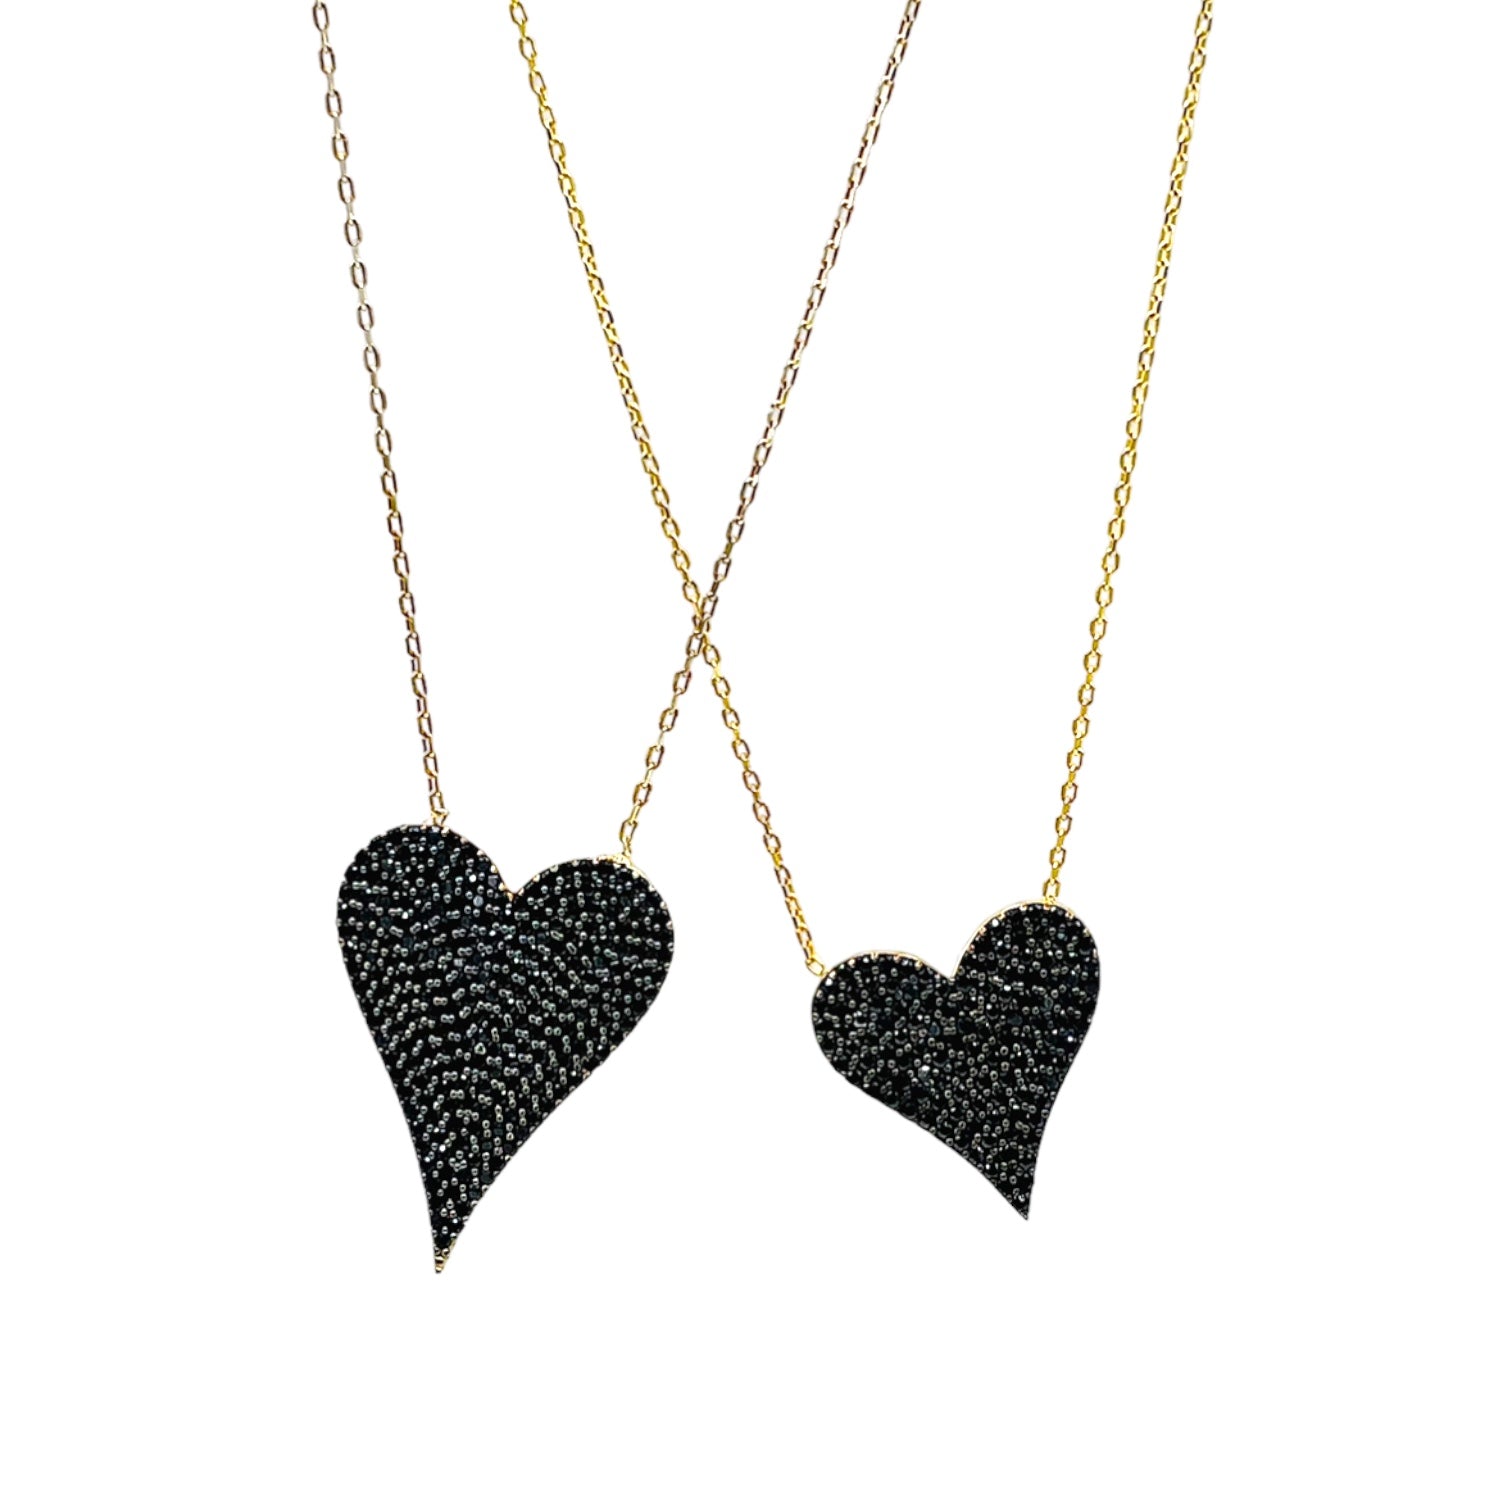 Big Love Large Black Pointed Heart Pendant Necklace